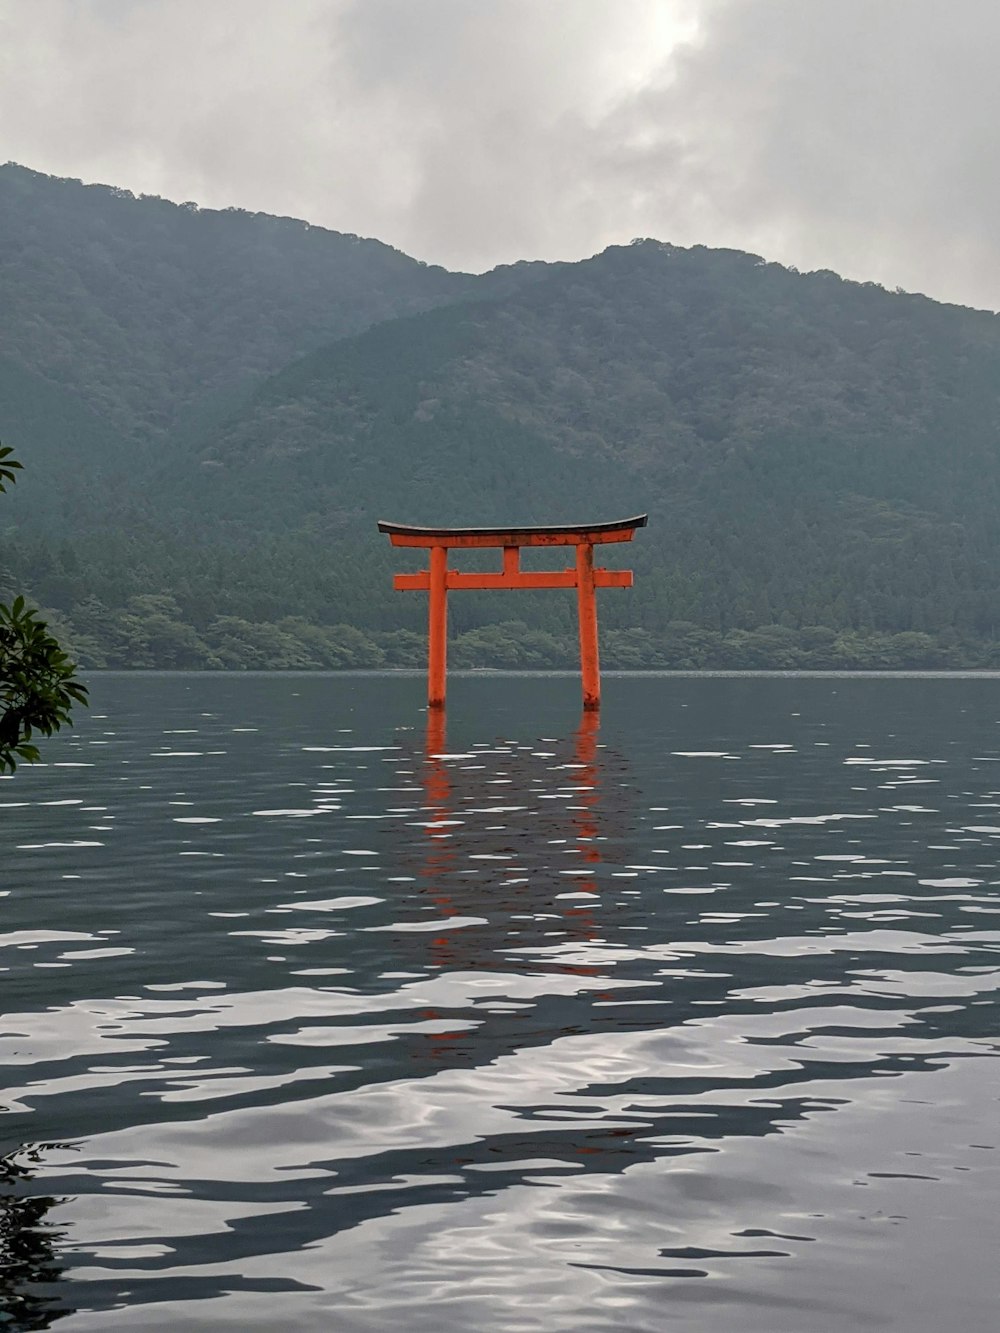 a red structure in a body of water with mountains in the background